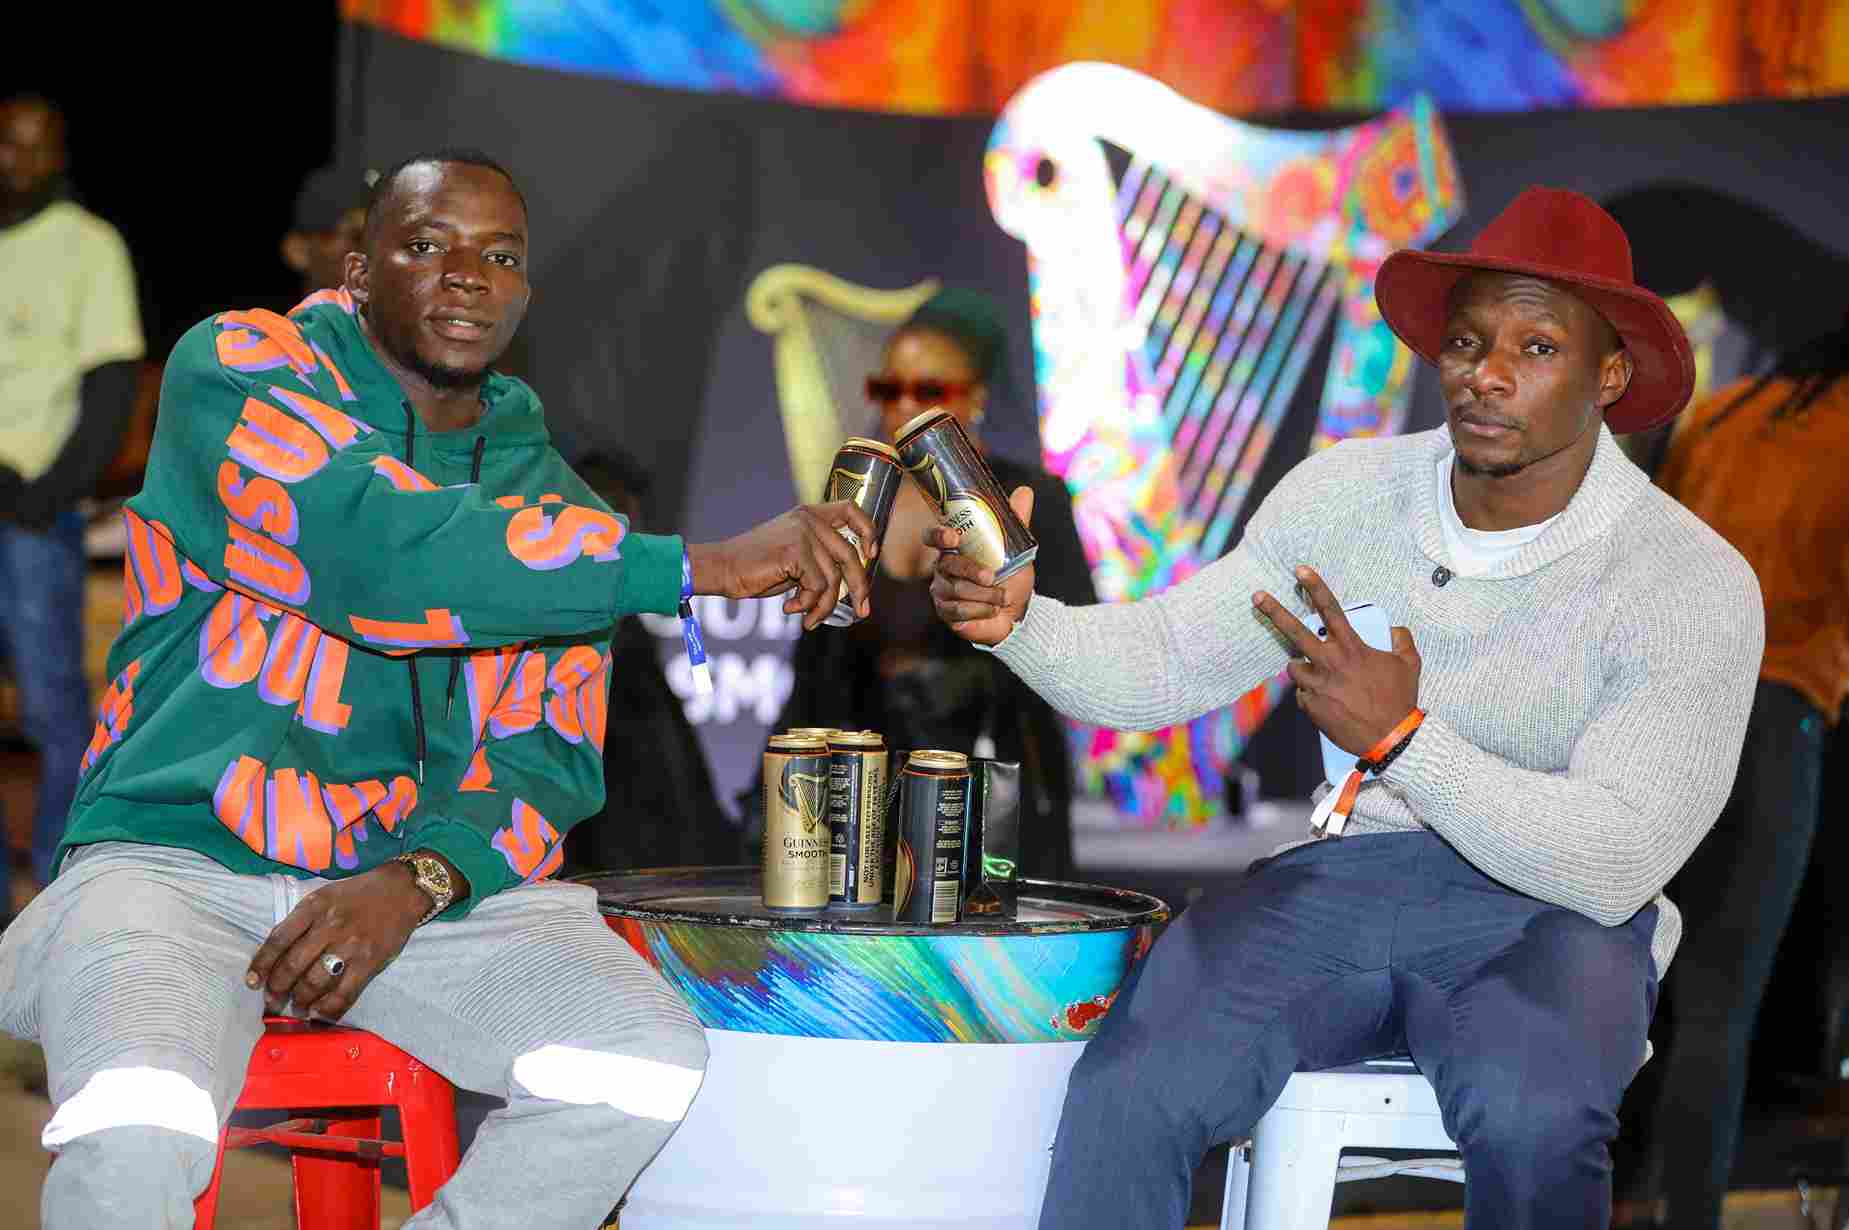 Leon Ochieng (Left) and Tyson Oluoch pose for a photo during the Guinness Smooth “Easy Going, Smooth Flowing” cam Leon Ochieng (Left) and Tyson Oluoch pose for a photo during the Guinness Smooth “Easy Going, Smooth Flowing” campaign launch at TRM.paign launch at TRM.